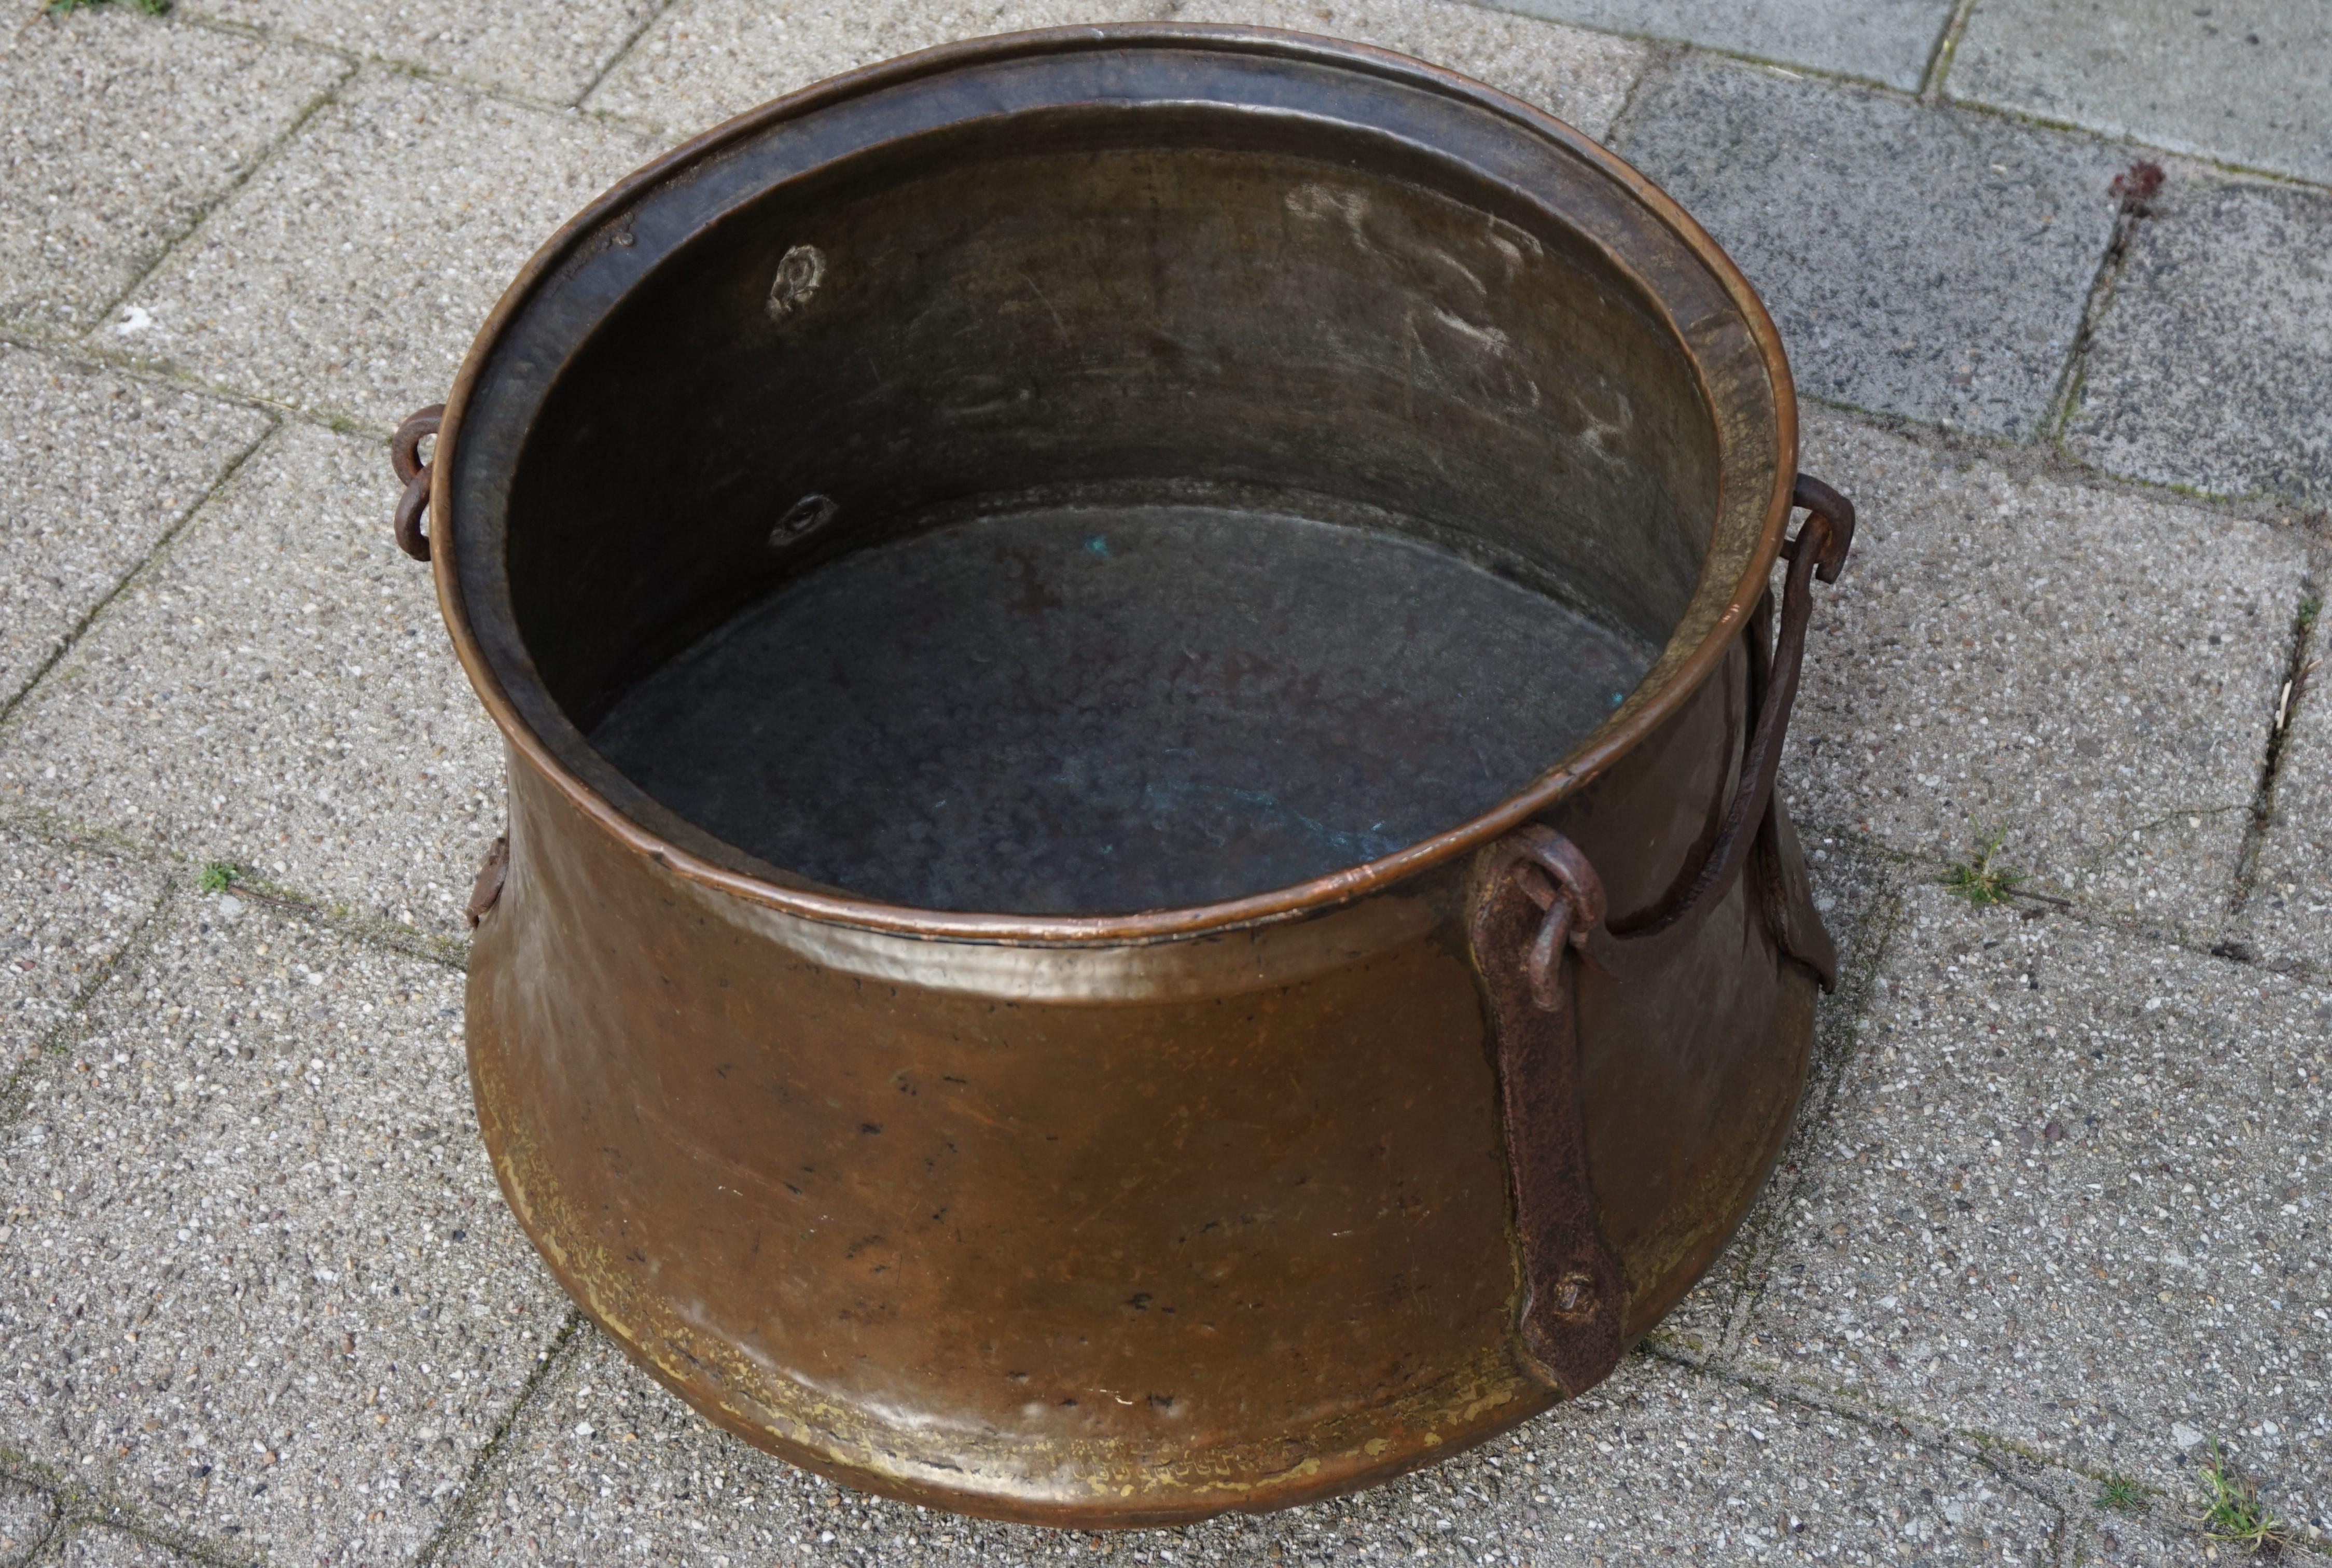 Early 1800s, rare size and highly stylish bucket with a marvelous patina.

Only if you were a very wealthy person in the Netherlands in the early 1800s, would you be able to afford such a large, impressive and all-handcrafted bucket. This stunning